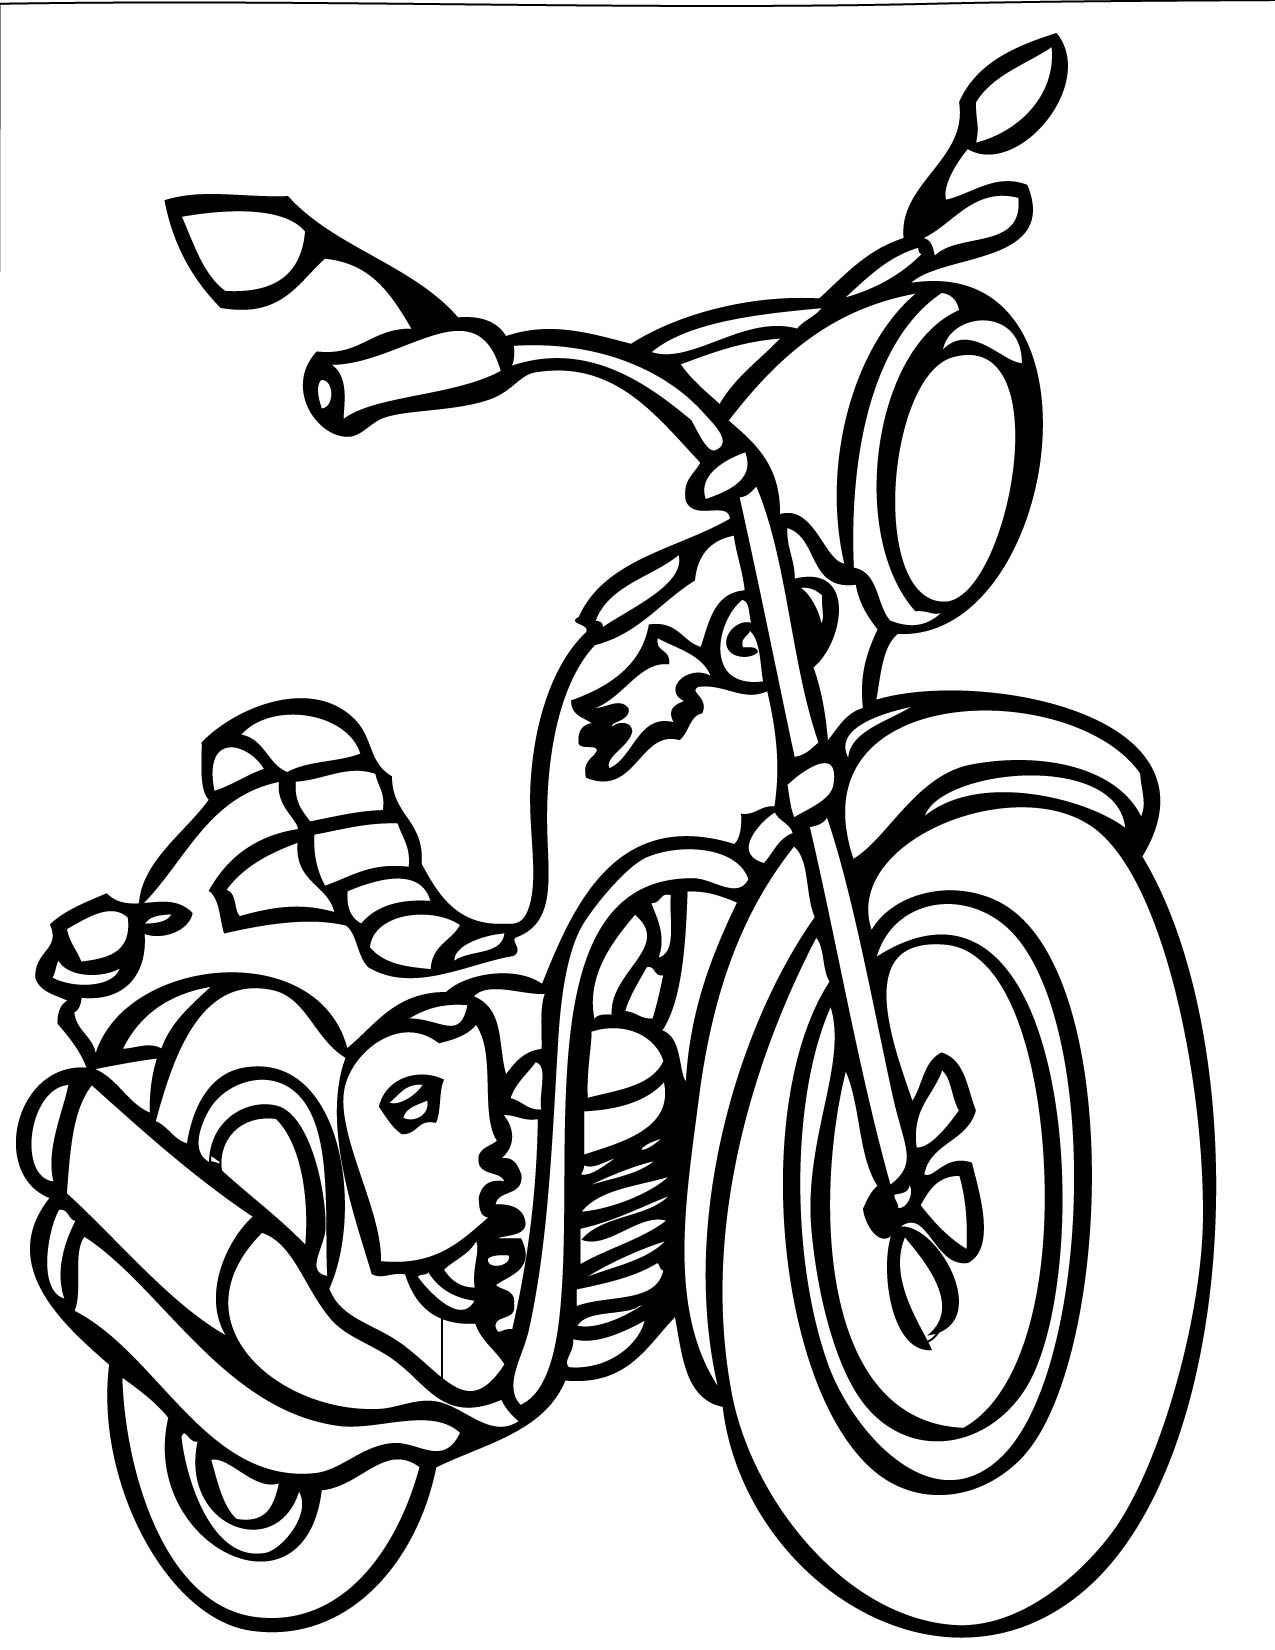 30+ Great Image of Motorcycle Coloring Pages - albanysinsanity.com